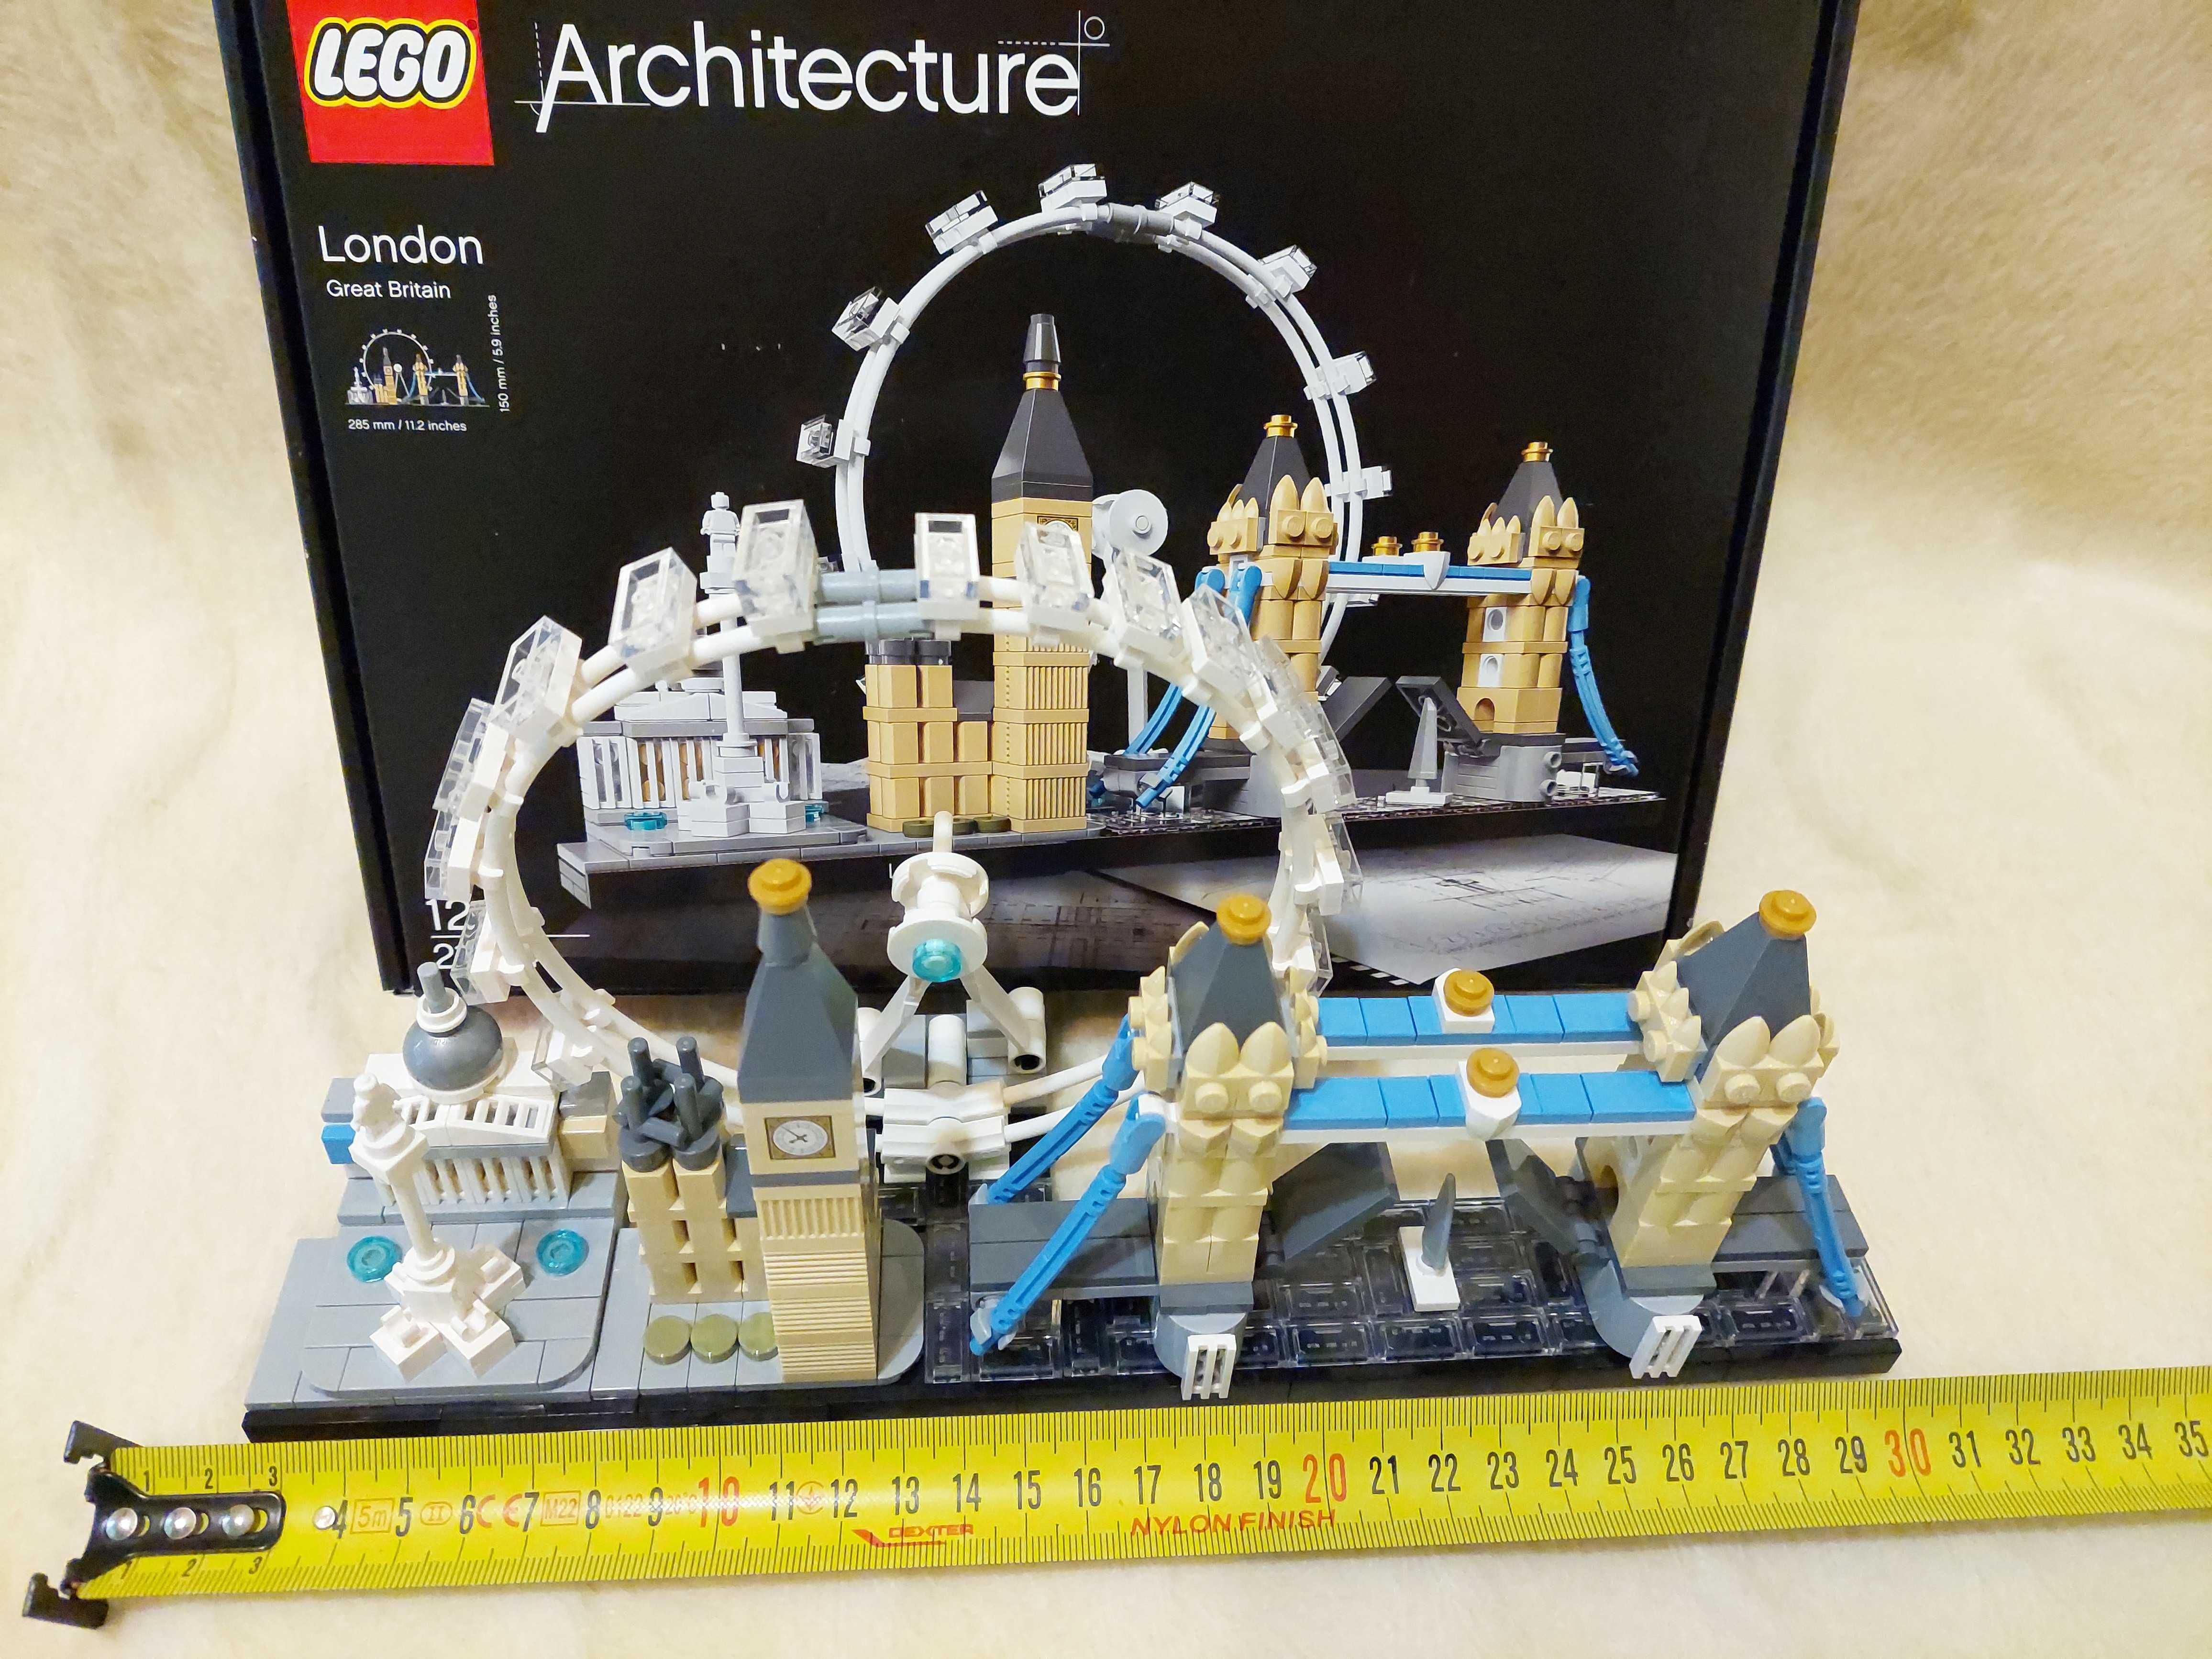 LEGO Architecture 21034 Londra COMPLET